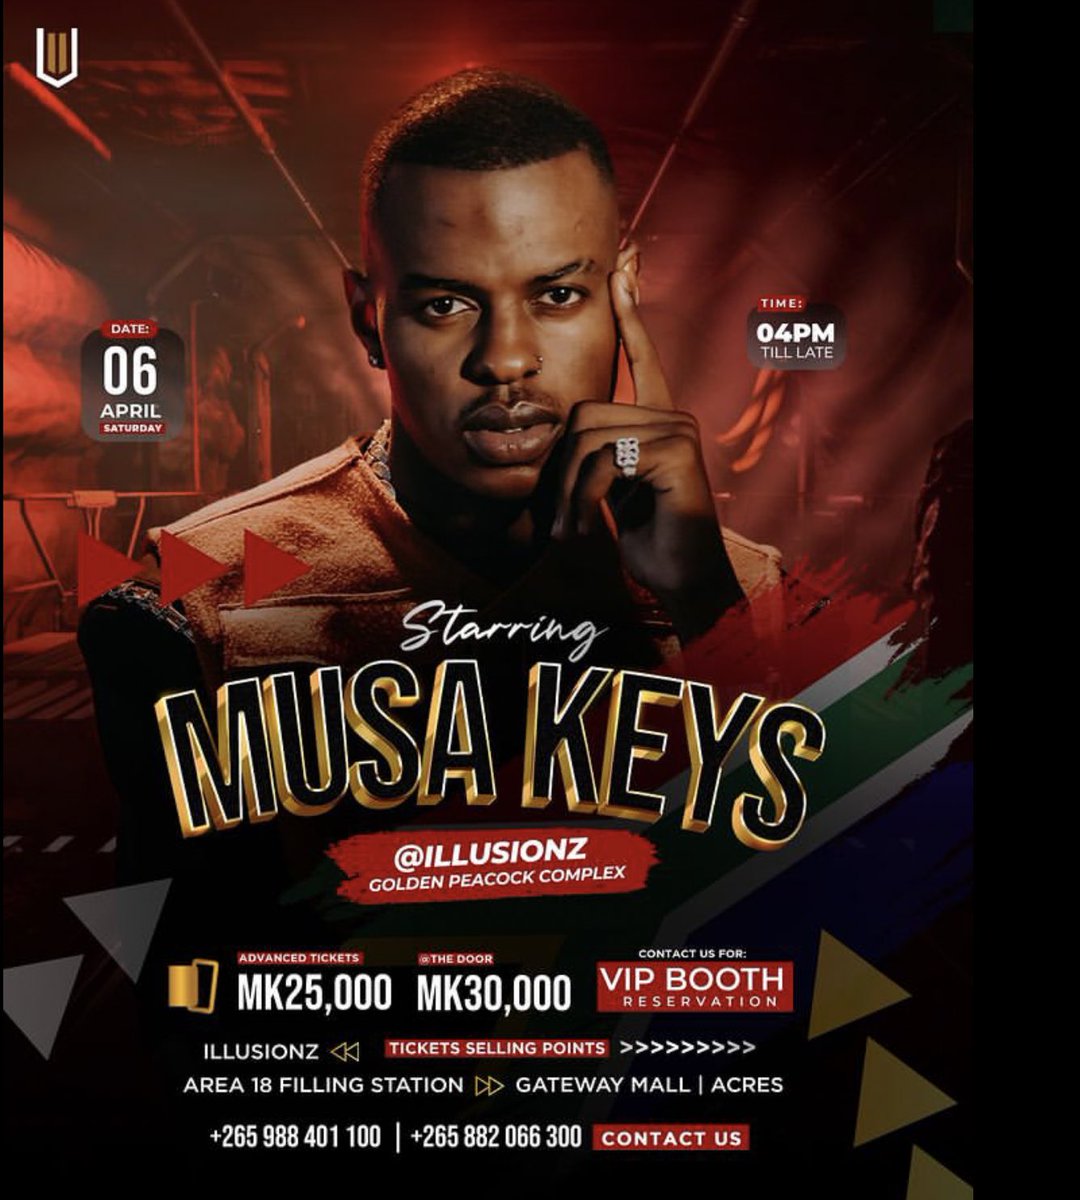 Mussa Keys Tickets are OUT NOW!!! @MusaKeyss